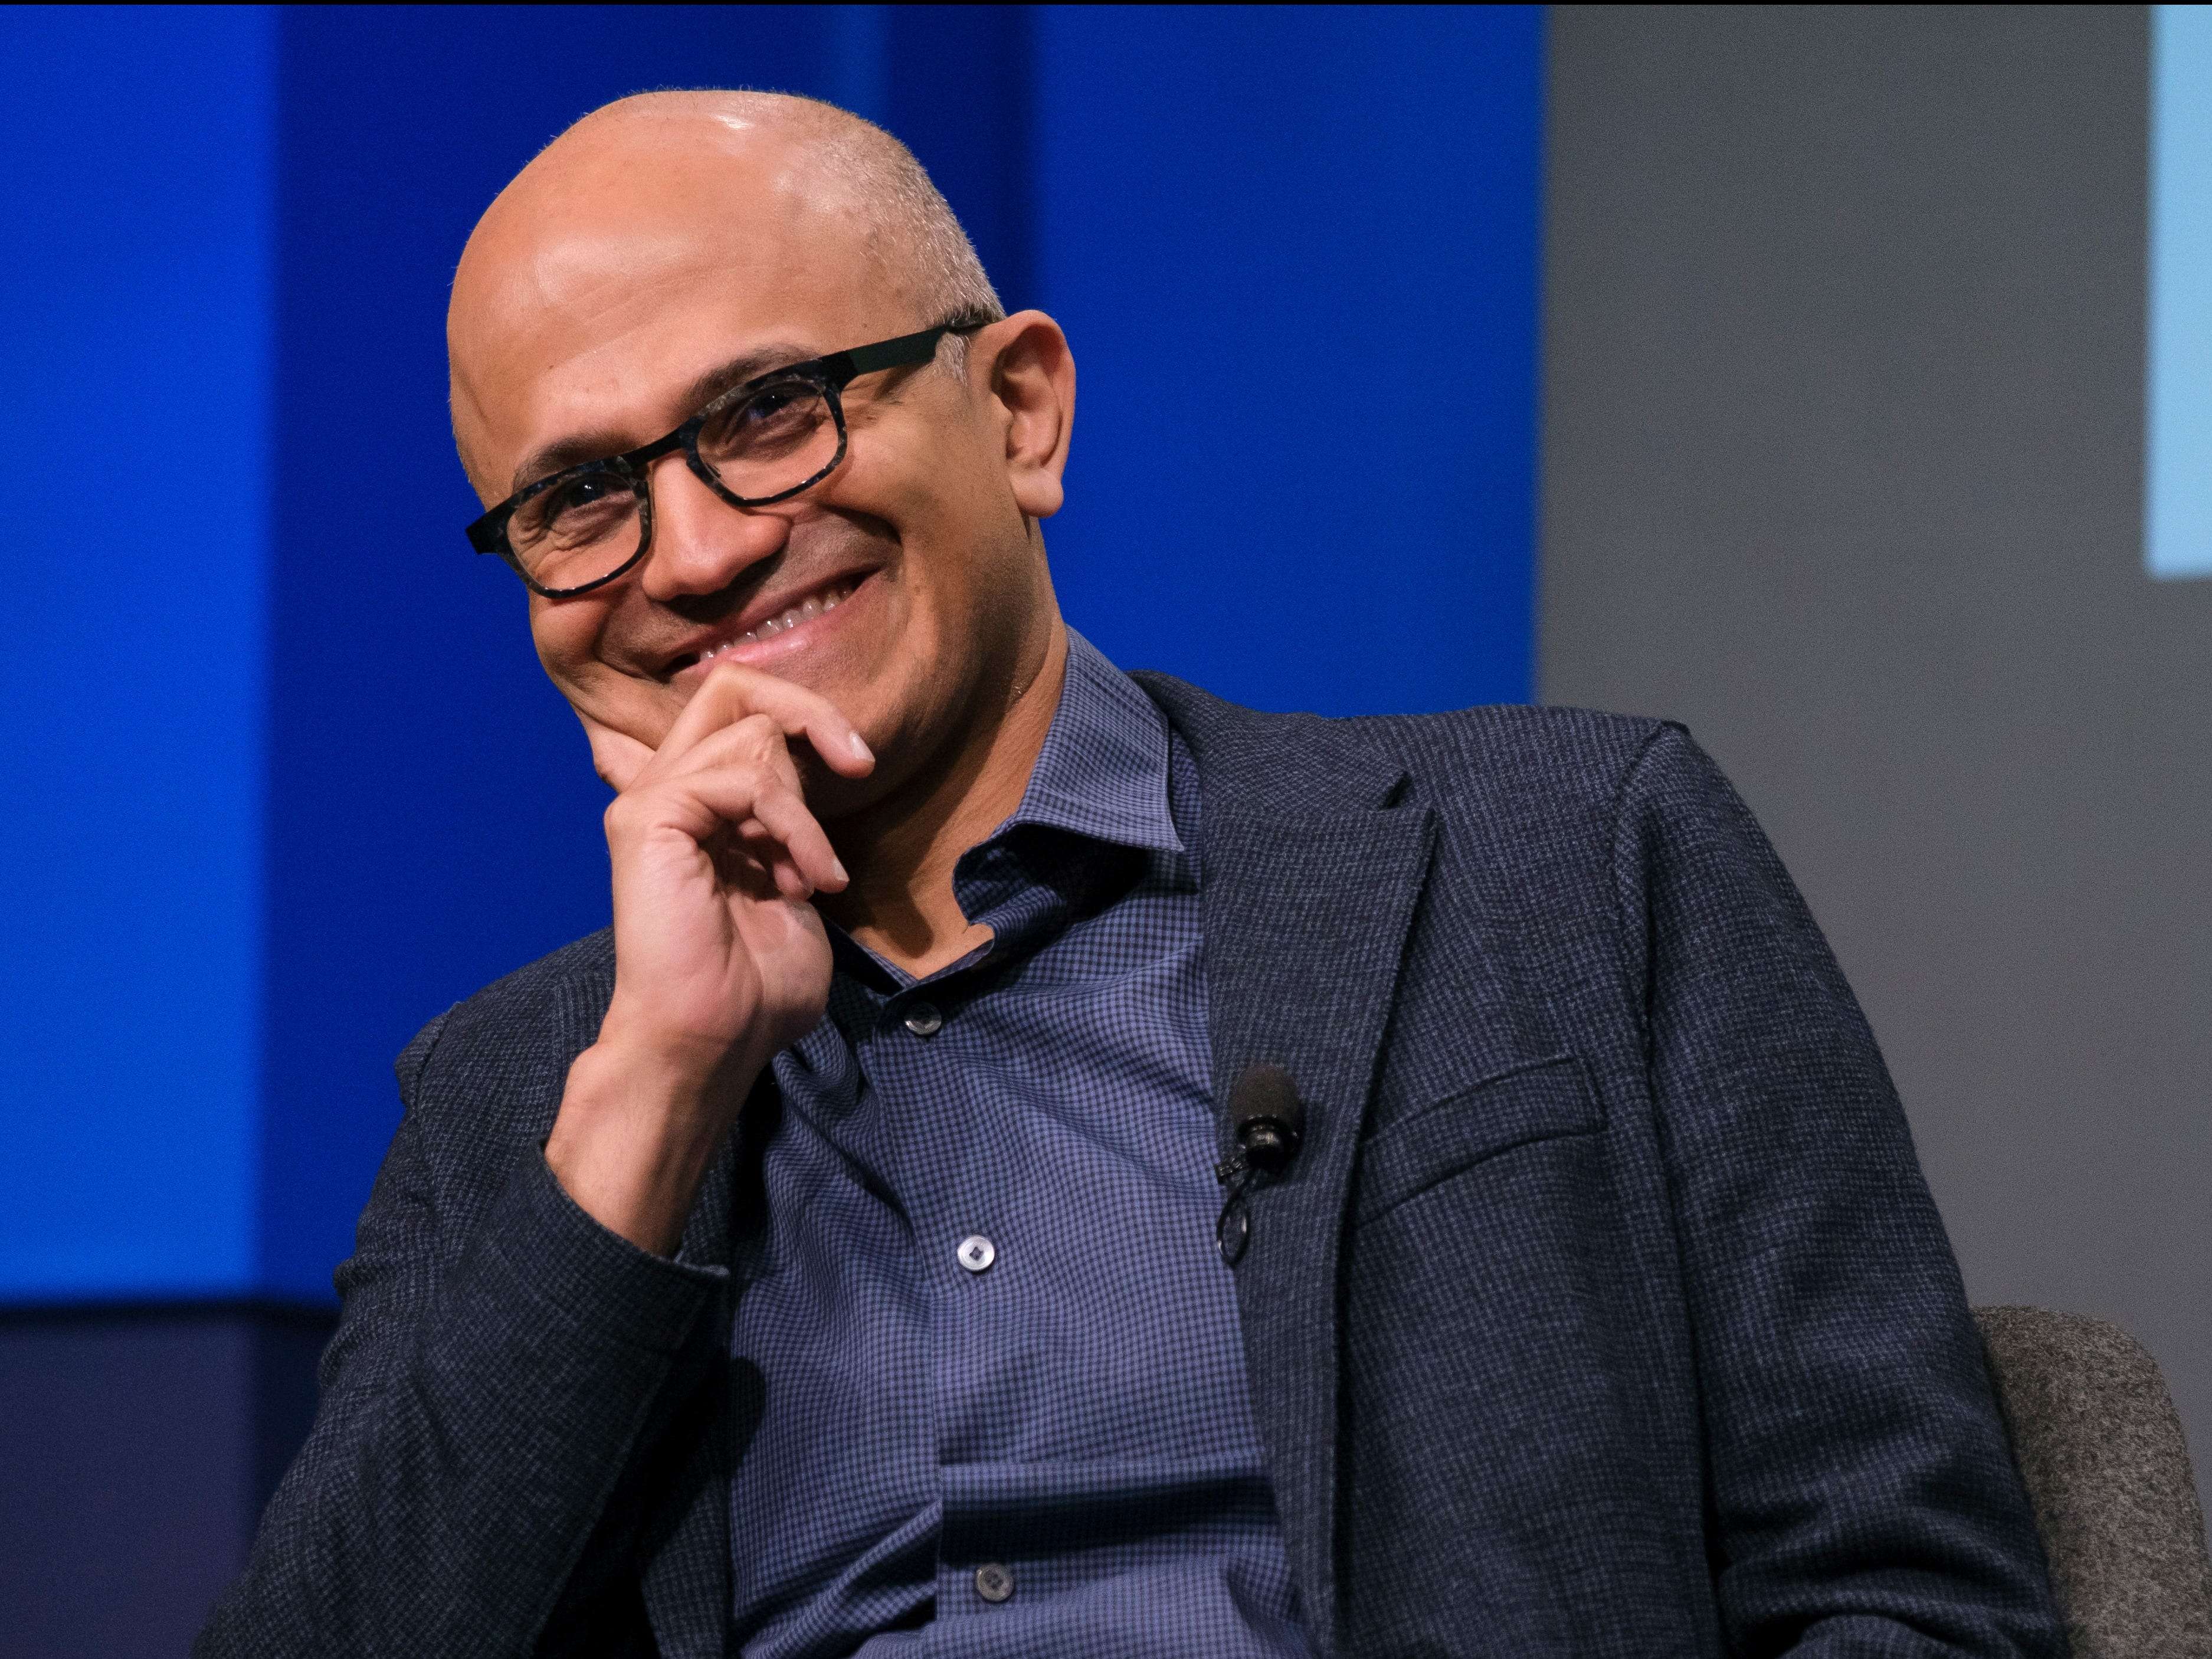 Microsoft's Satya Nadella was rated the best CEO in the US by employees